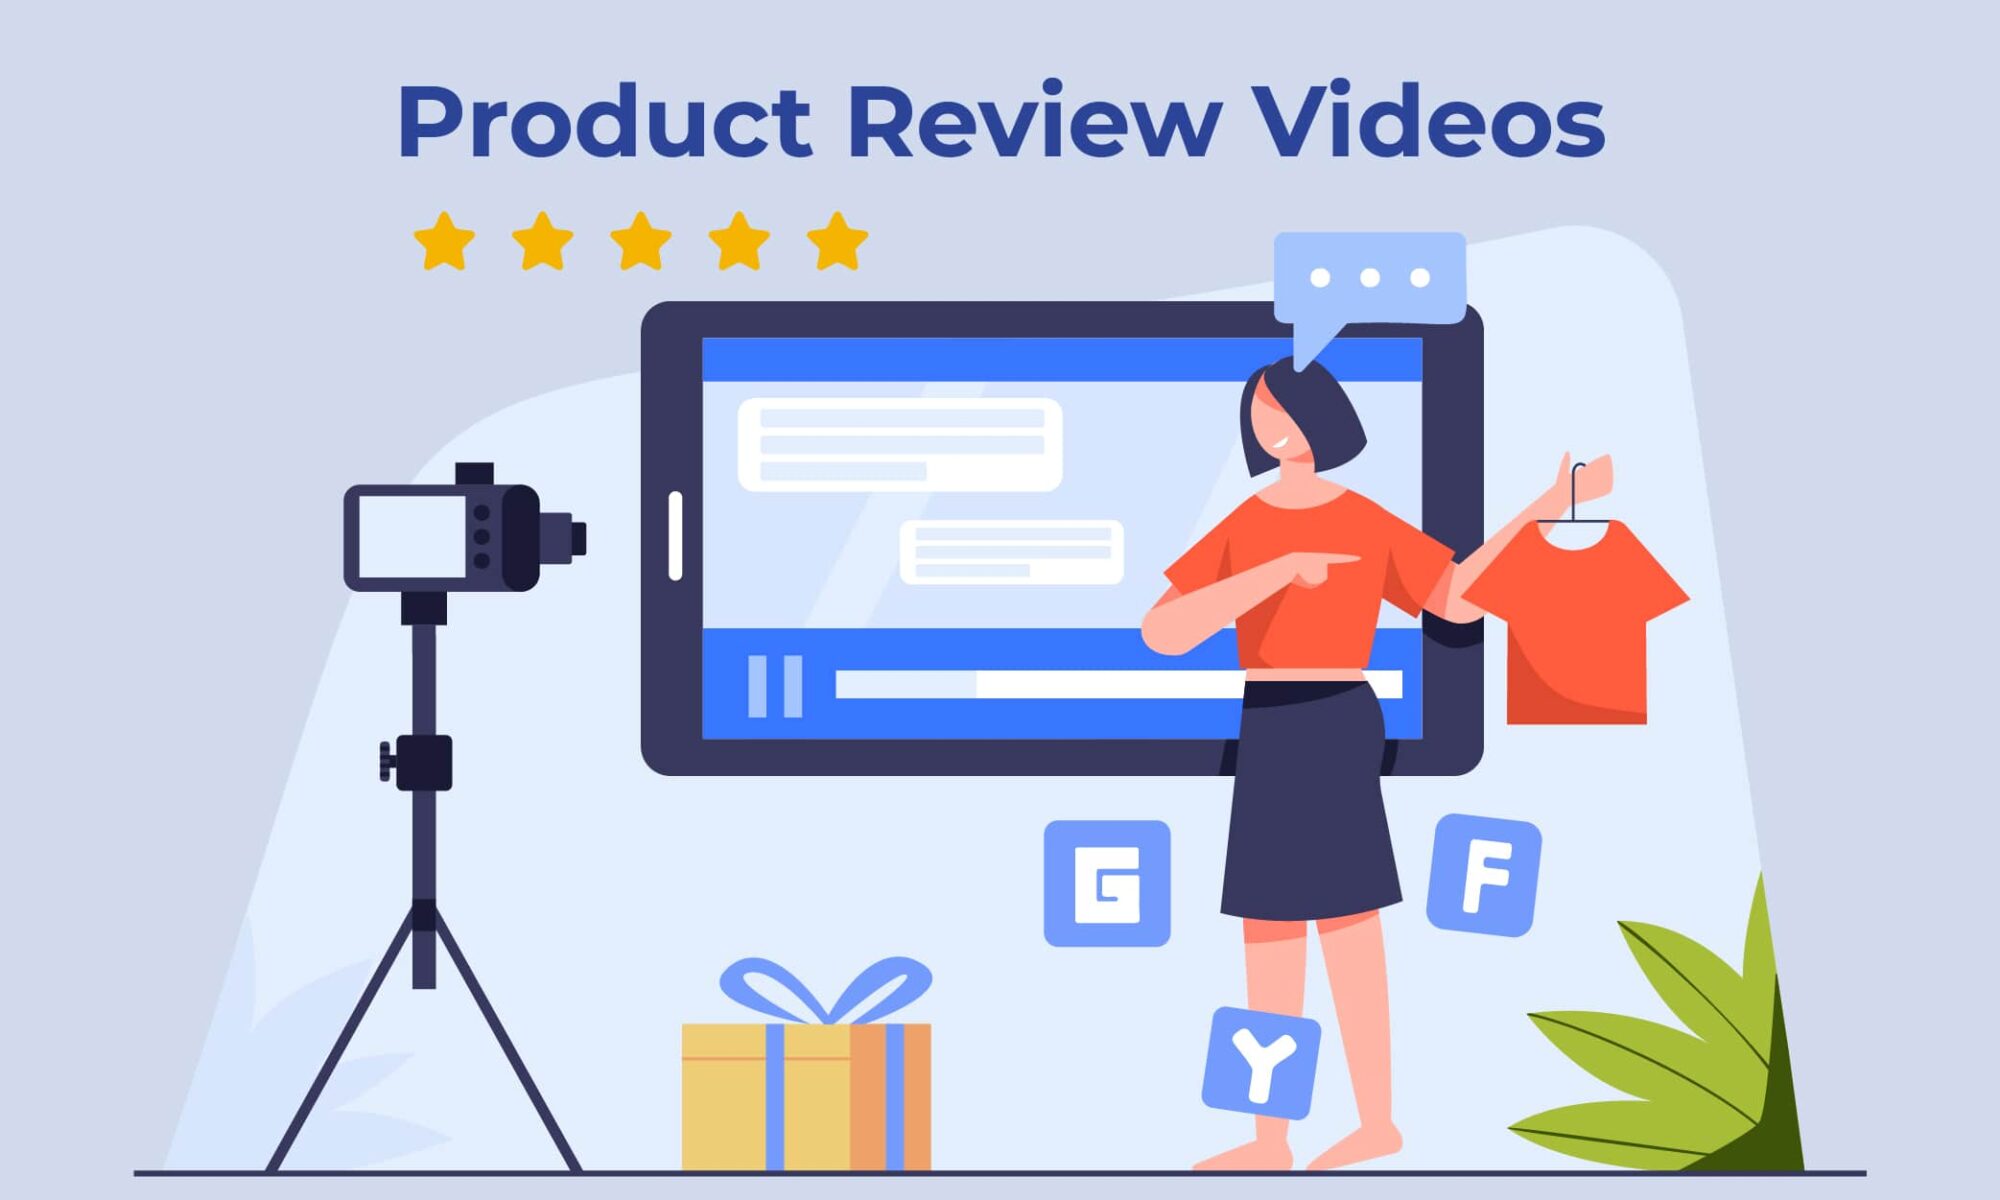 Product Review Videos